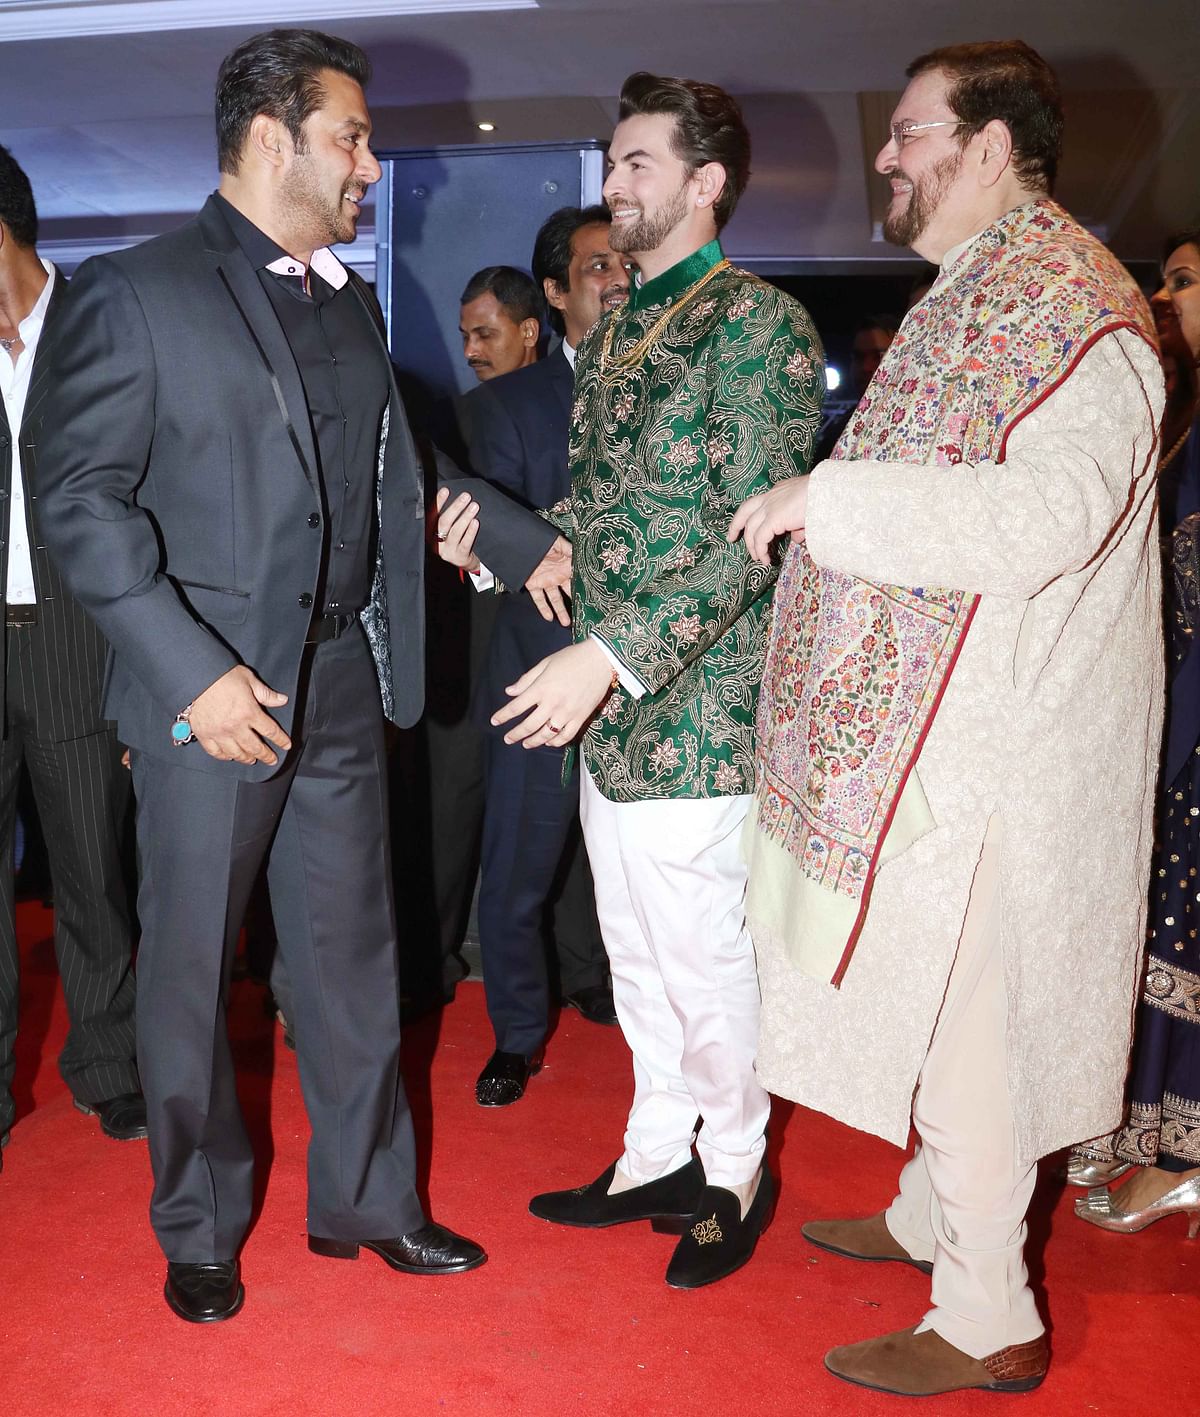 Take a look at some of the pictures from Neil Nitin Mukesh and Rukmini Sahay’s wedding reception.